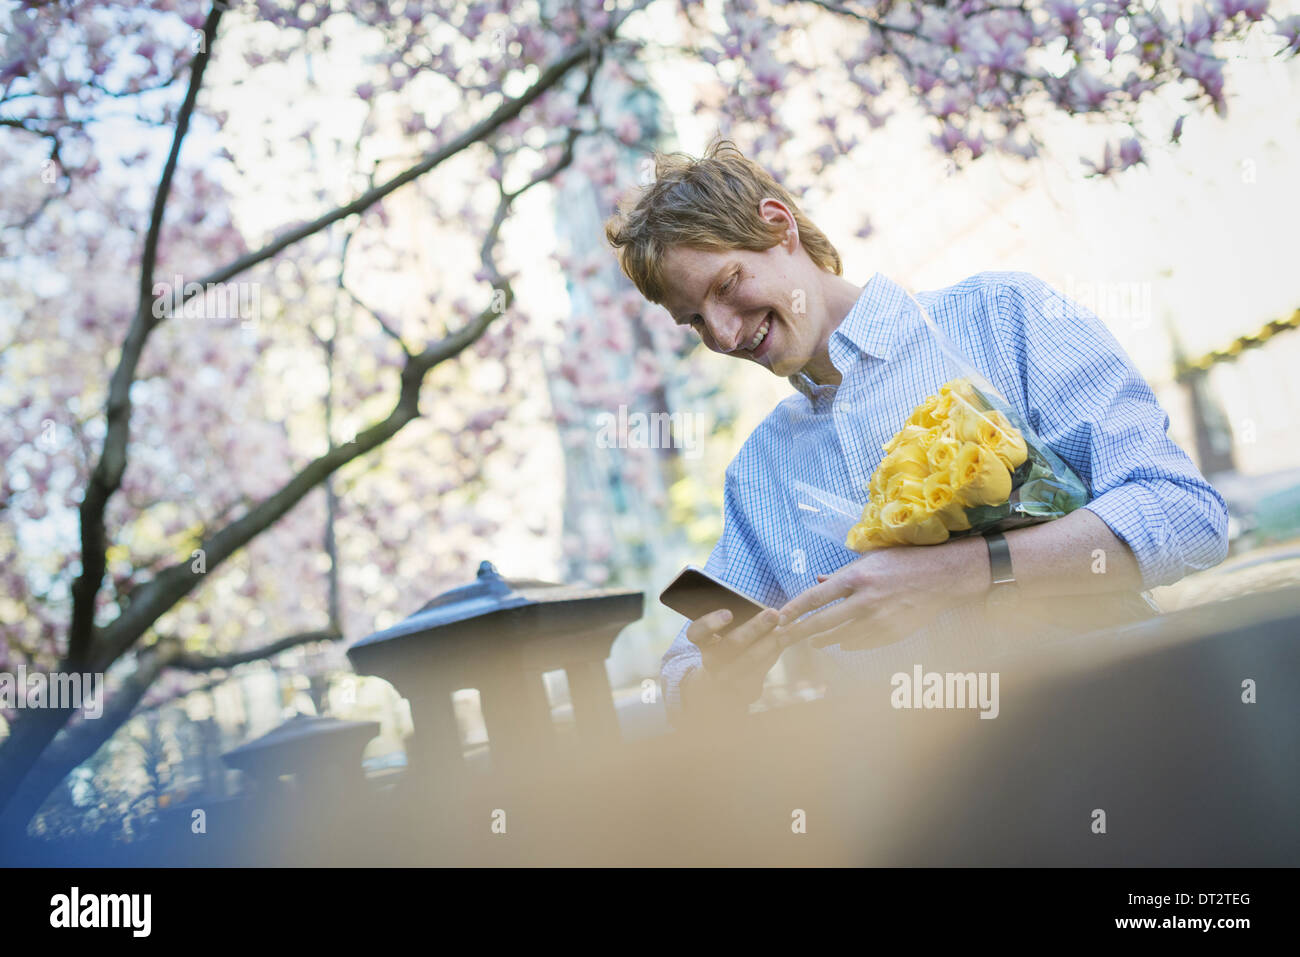 A young man in the park in spring using a mobile phone Holding a bunch of yellow roses Stock Photo